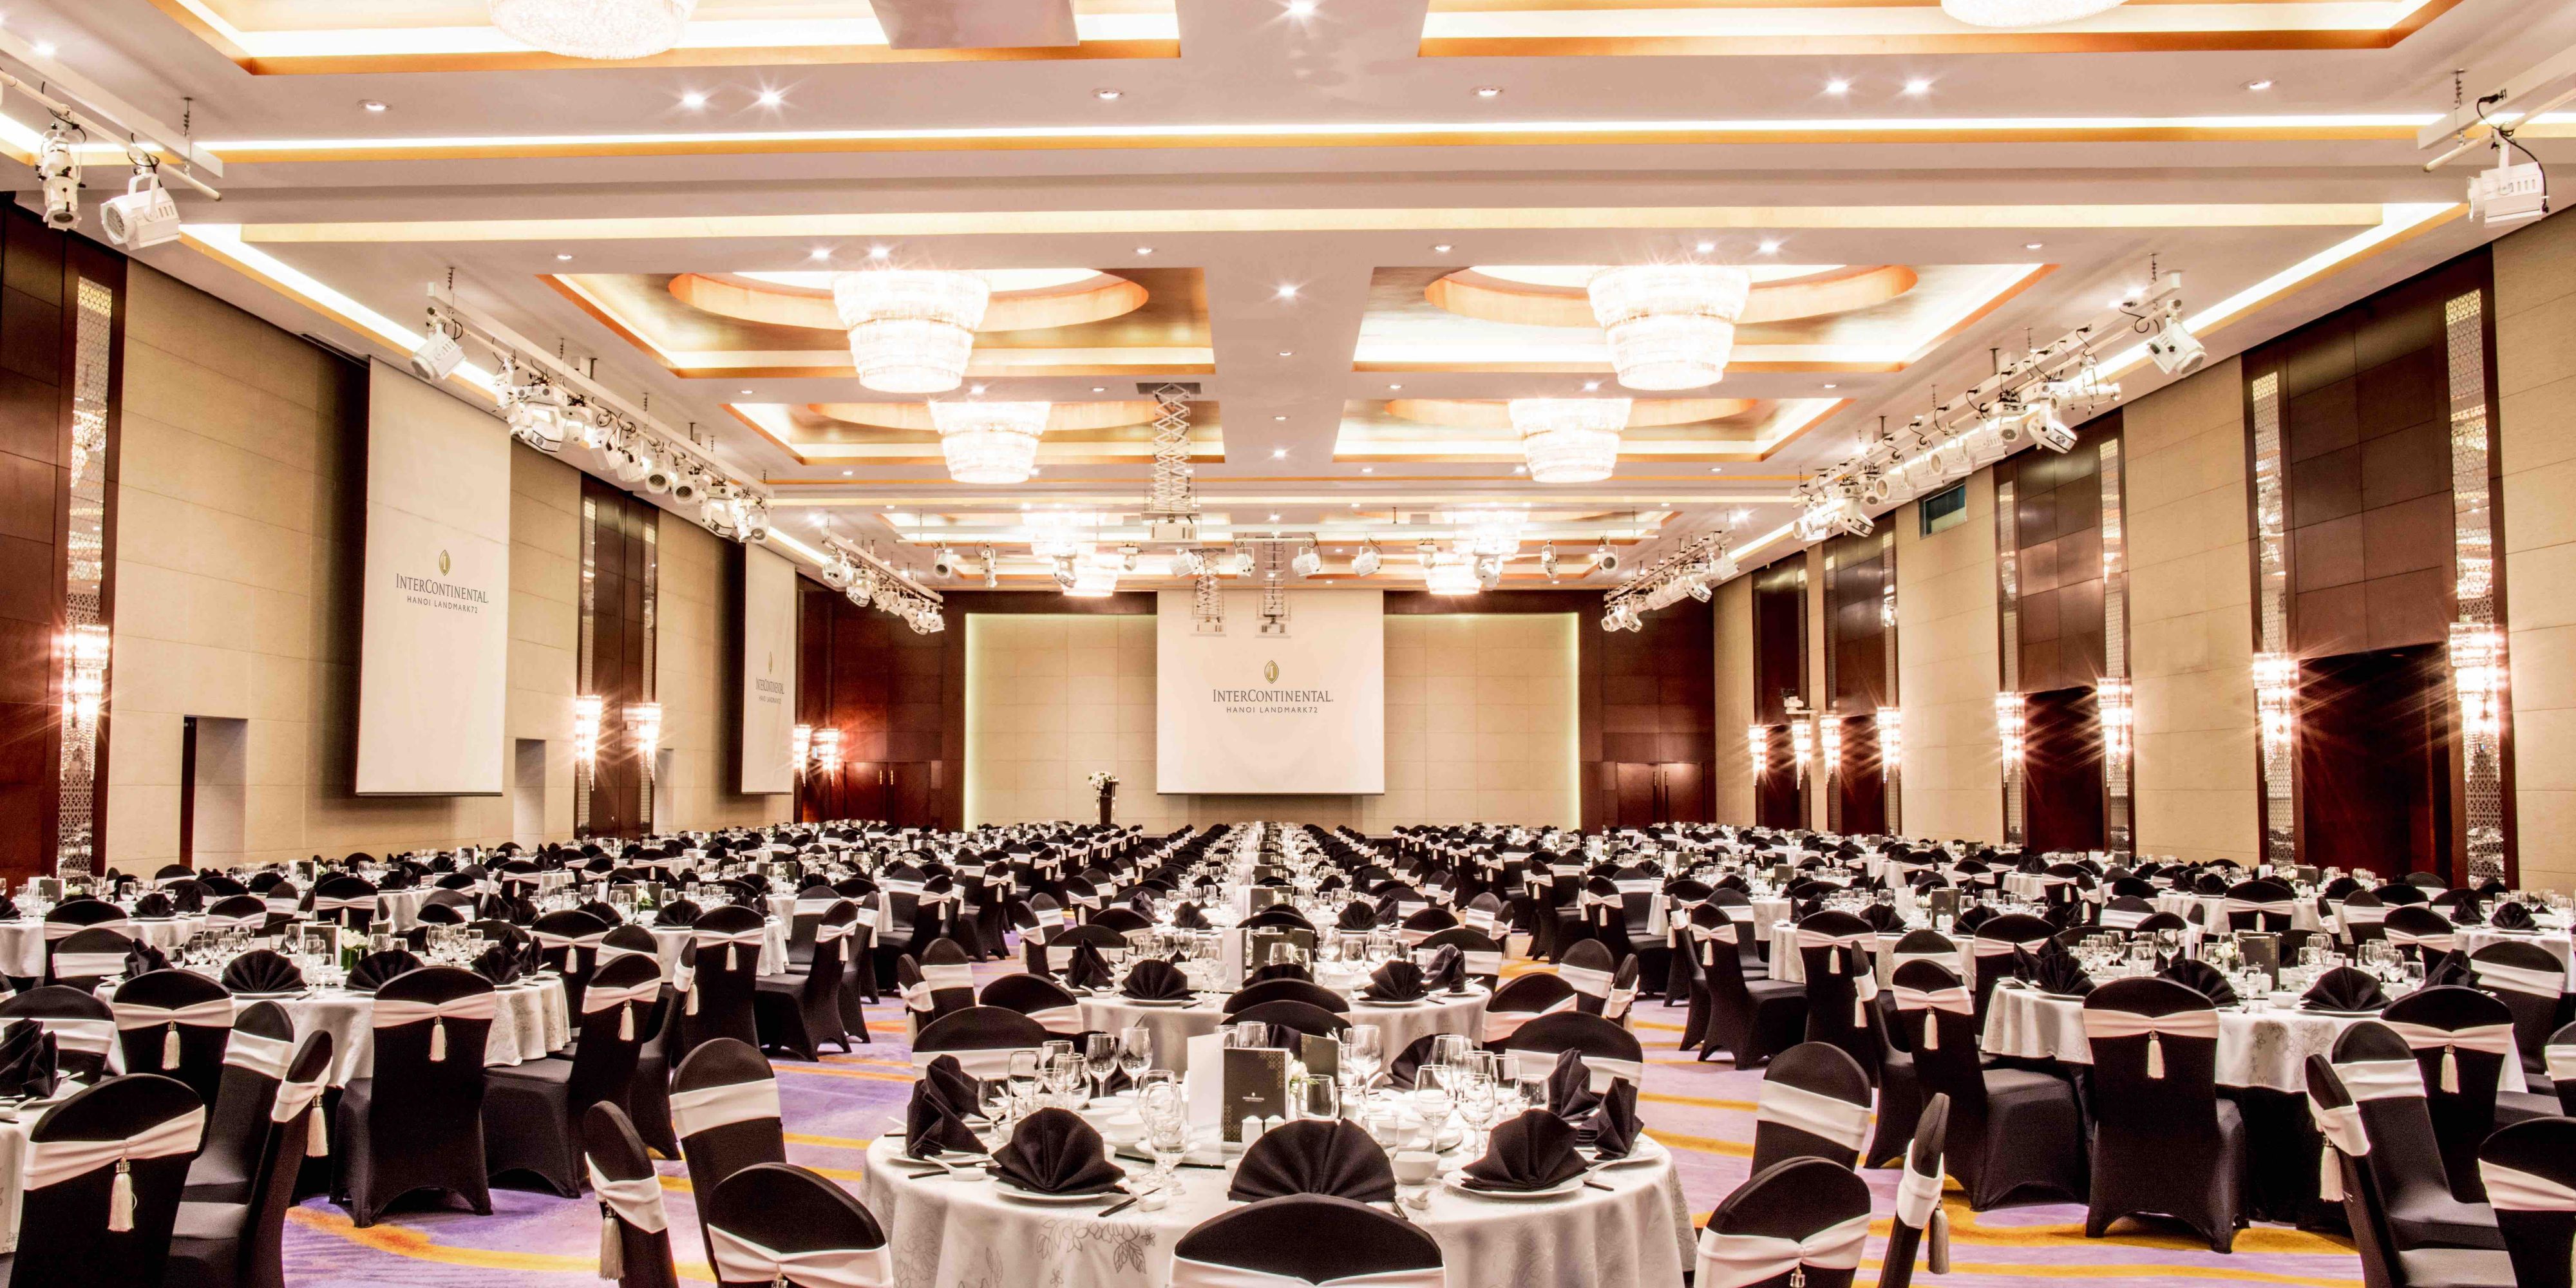 From small to large-scale conferences for up to 1,000 delegates, bring your boldest visions to life at the spacious and versatile Convention Centre, featuring modern audio-visual technology. Our Grand Ballroom offers square metres of pillar-less space, complemented by a meeting foyer that is one of Hanoi's largest.